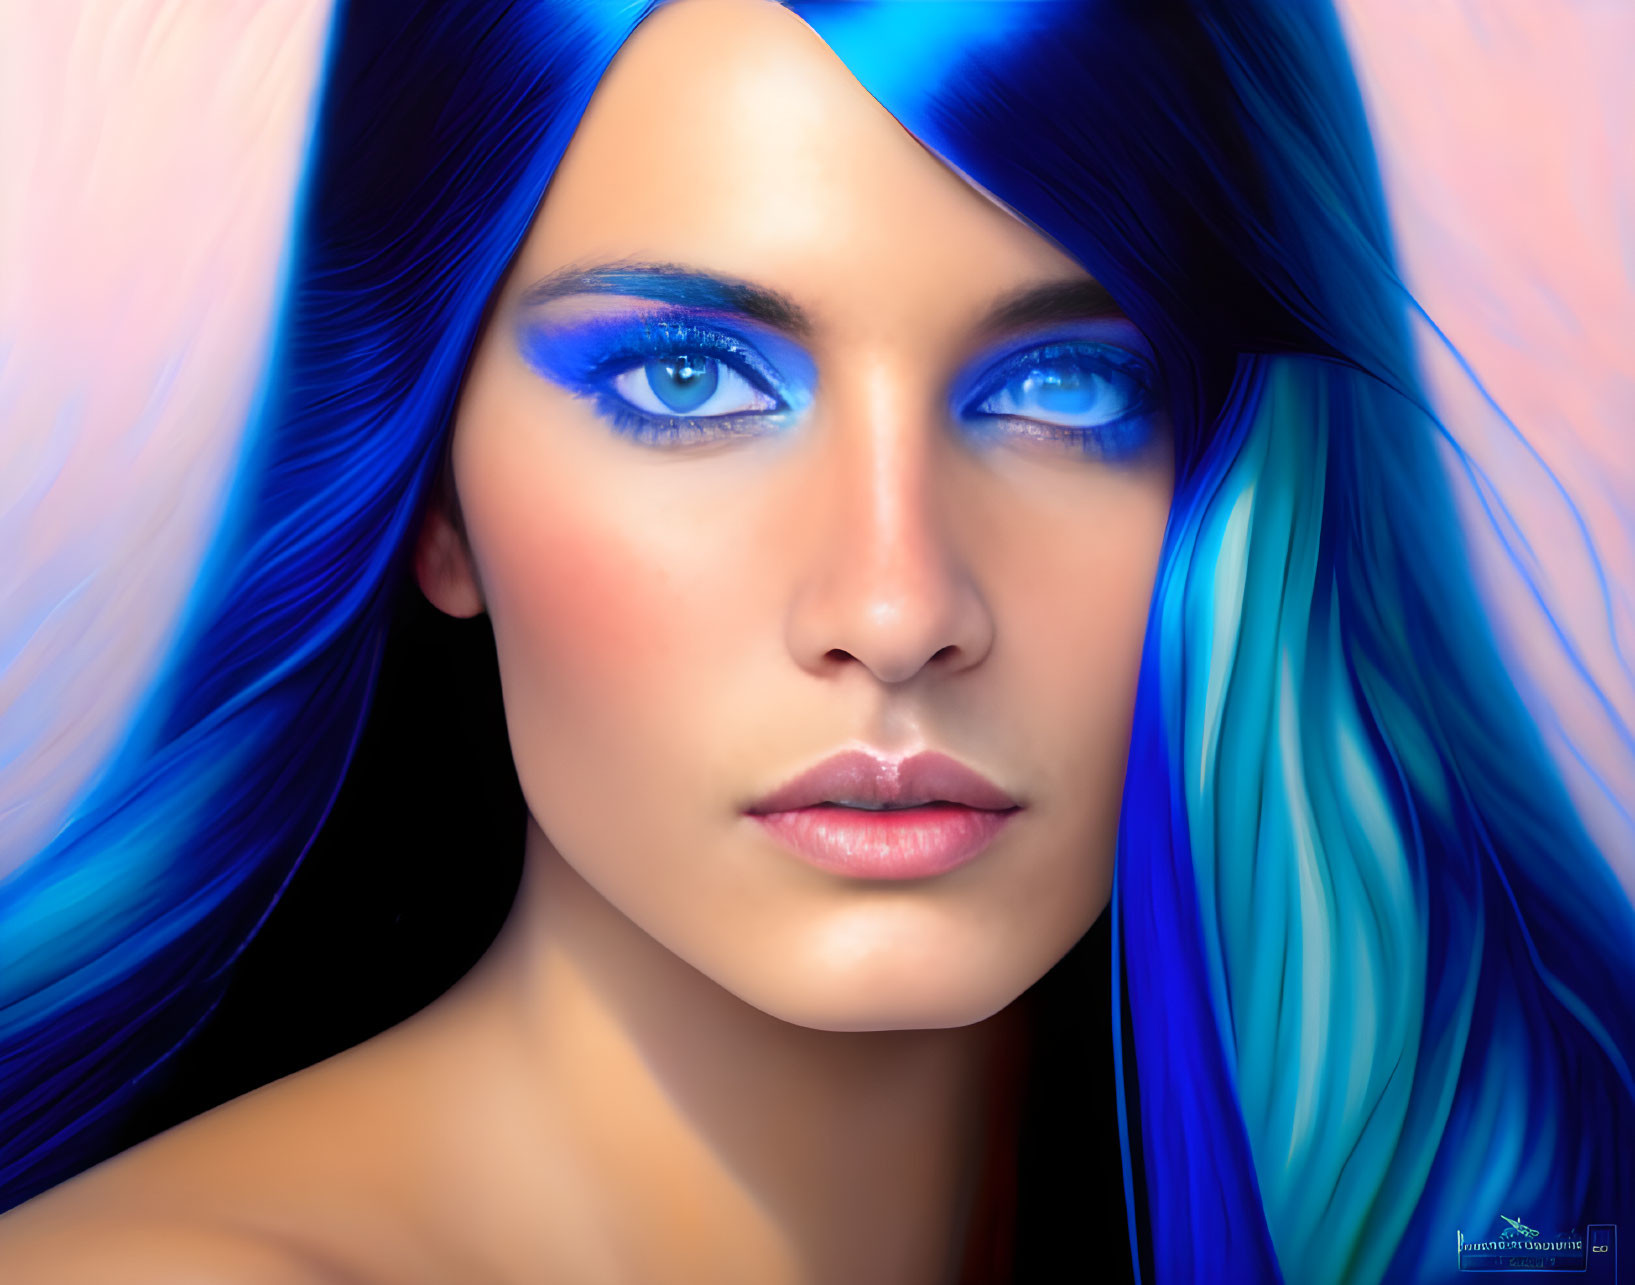 Digital artwork: Woman with blue eyes, eye shadow, and flowing hair on multicolored background